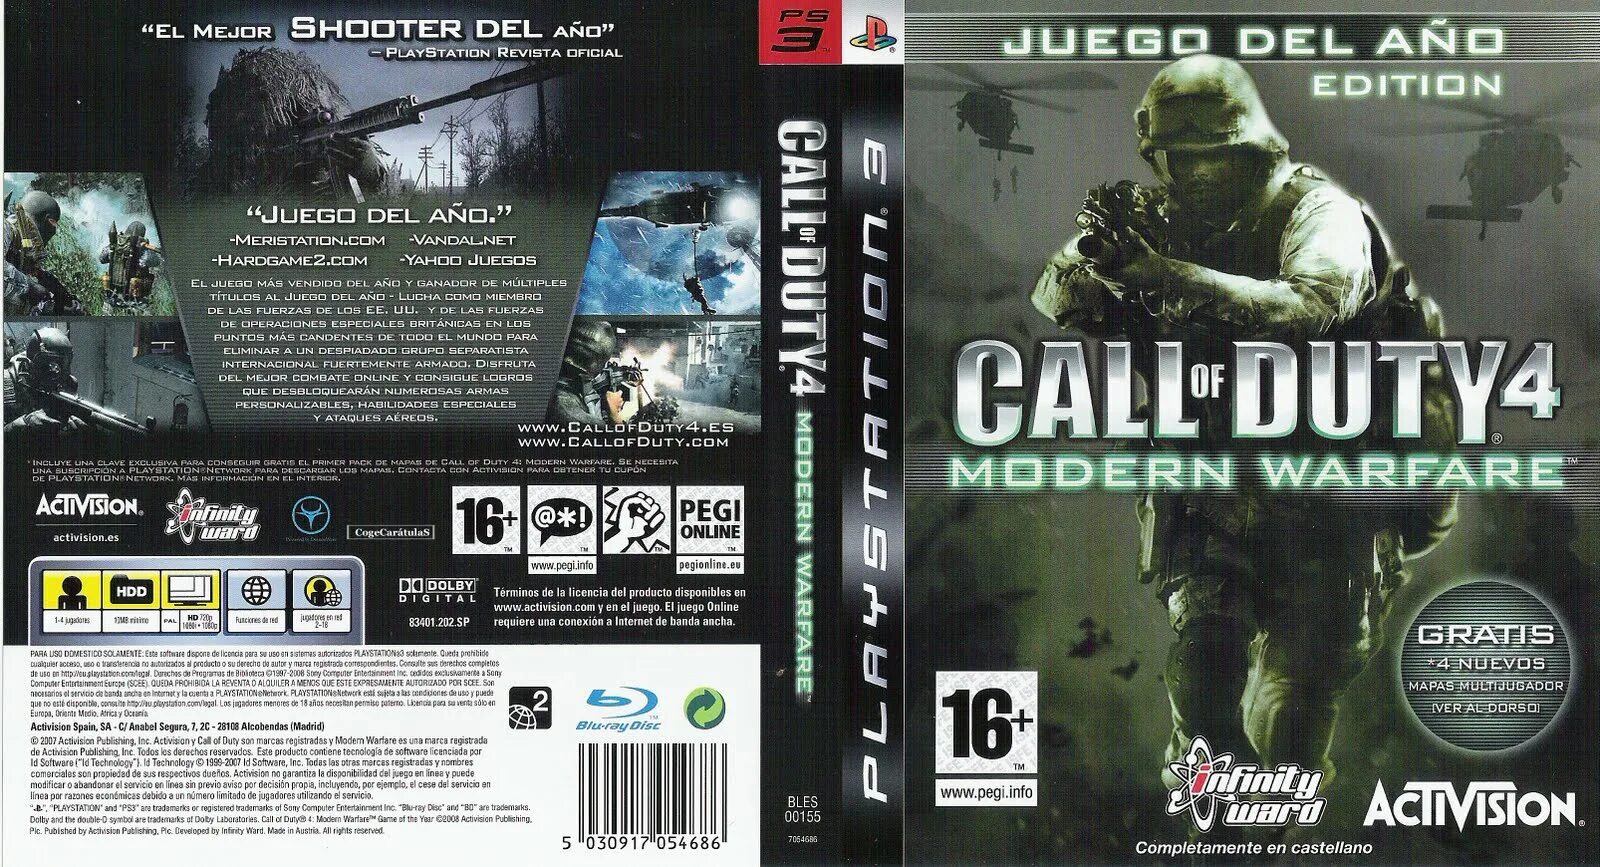 Call of Duty 3 диск на ПС 3. Call of Duty Modern Warfare 4ps3 диск. Ps3 Cod 4 Cover. Call of Duty 4 ps3. Bles ps3